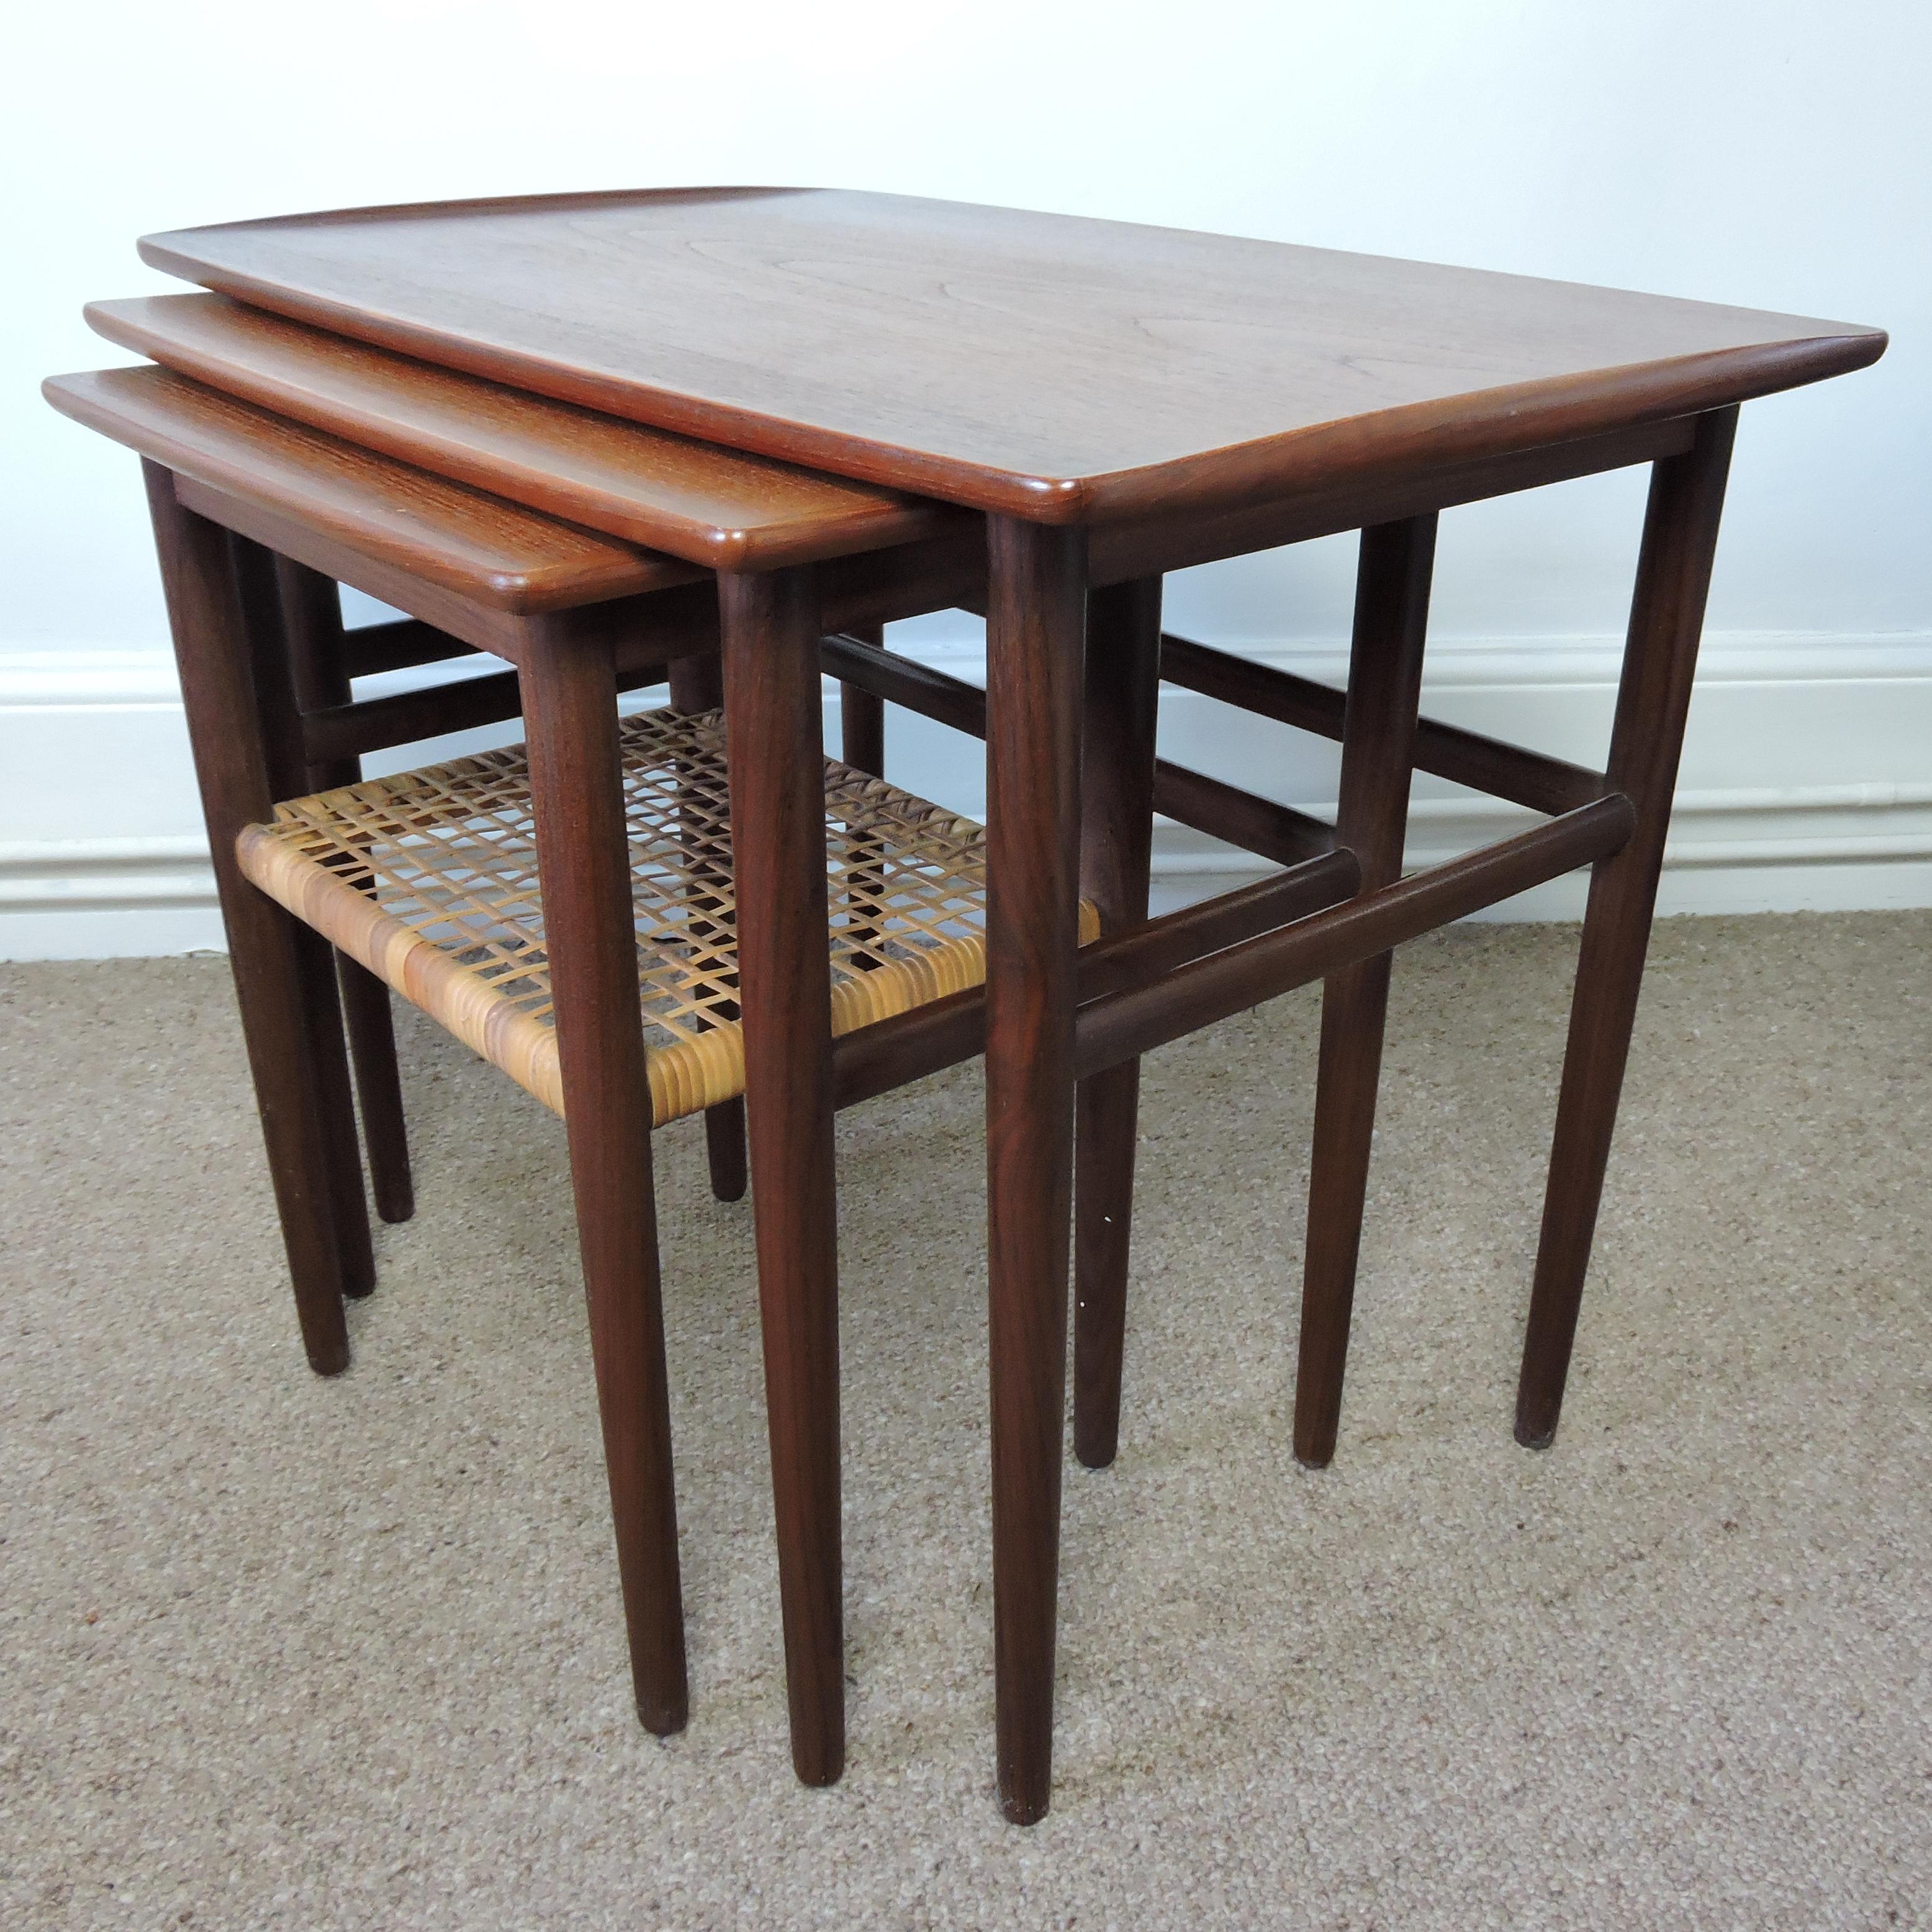 Midcentury Danish Teak and Cane Nesting Tables, 1950s For Sale 1